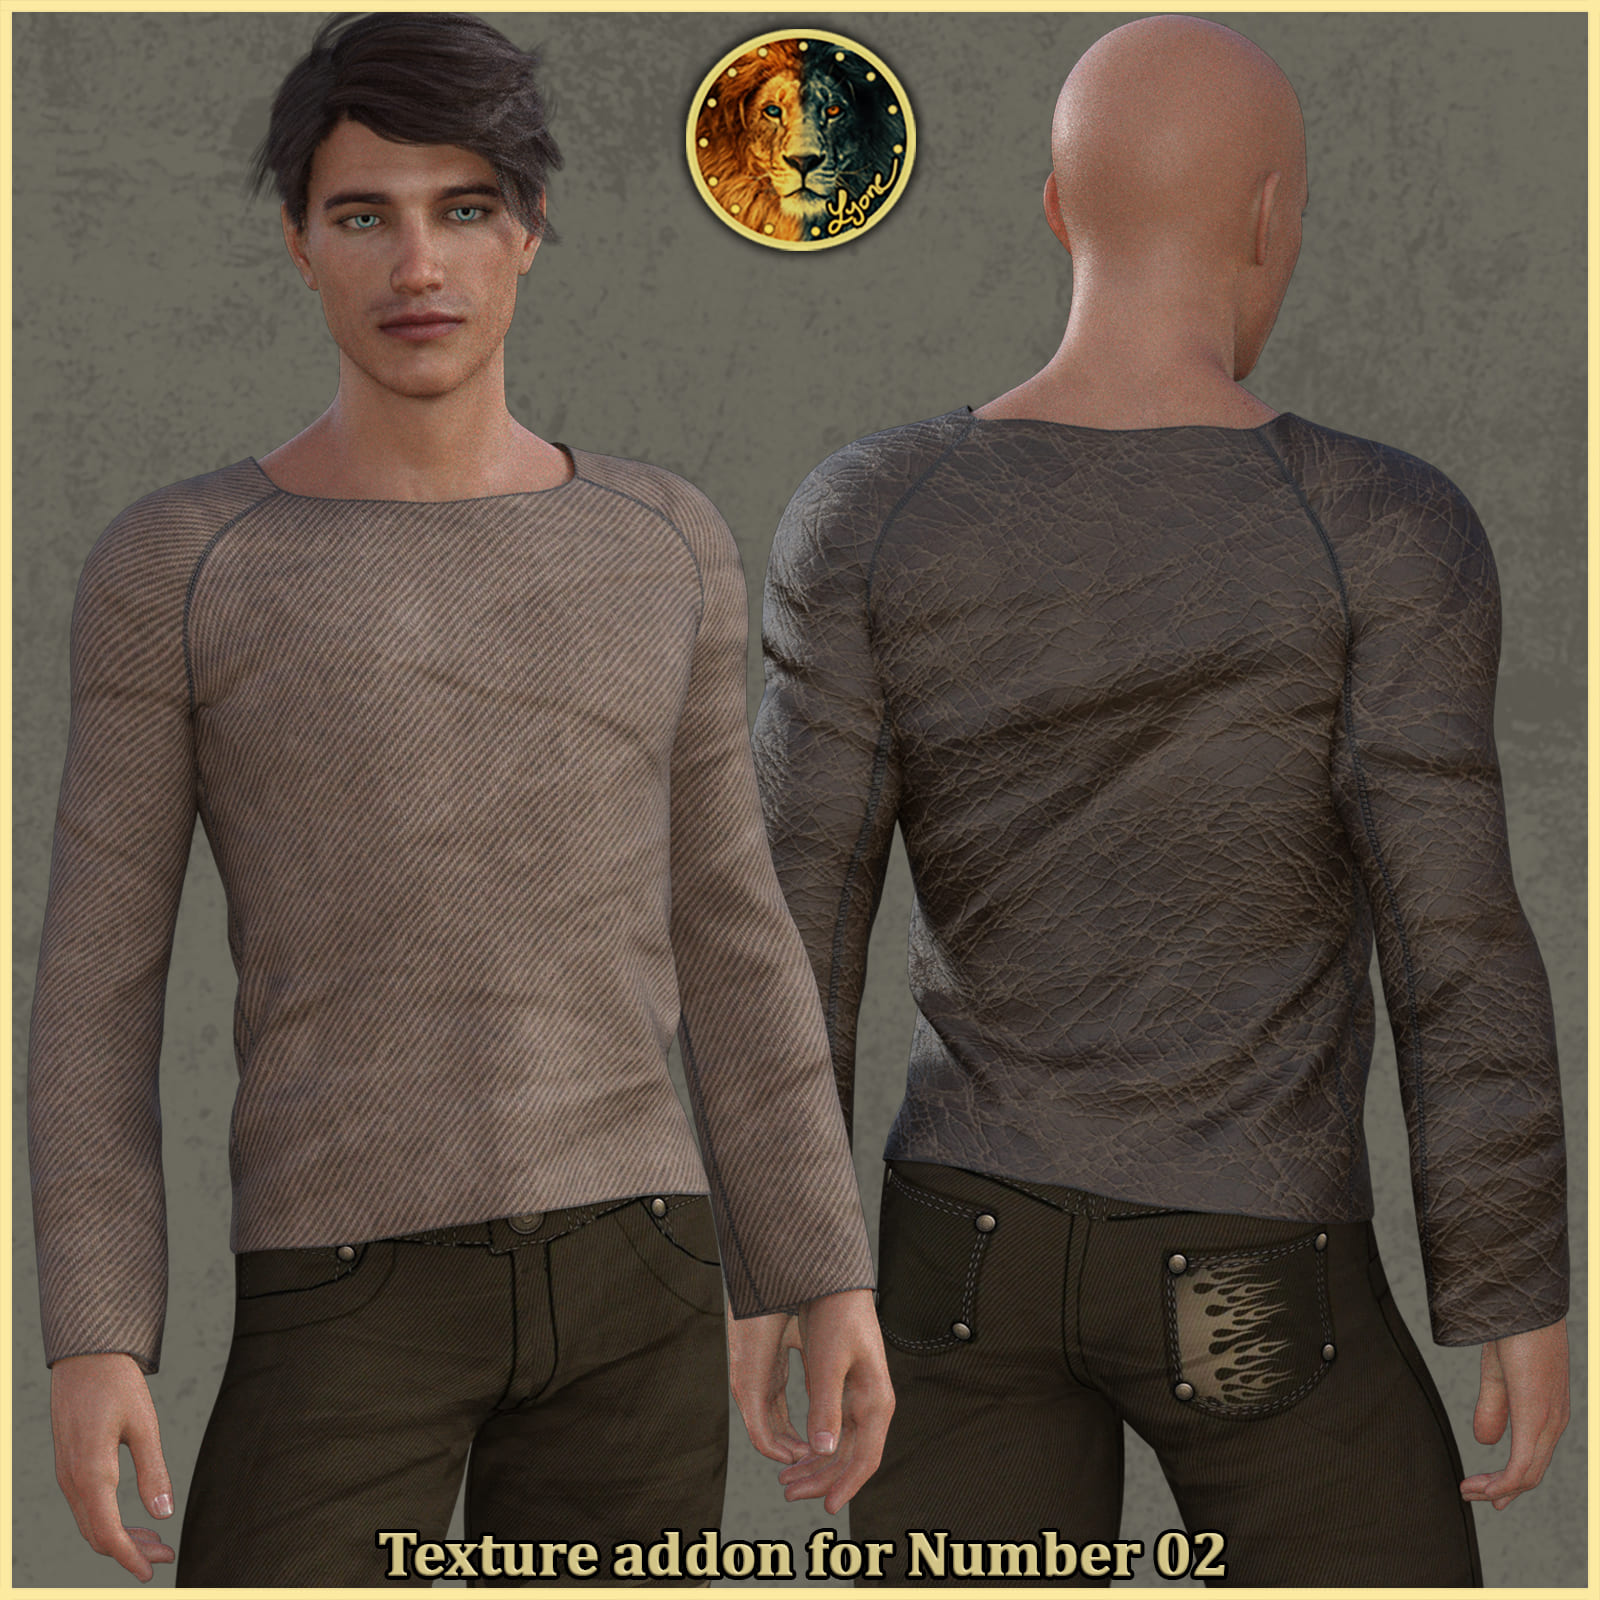 Texture addon for Number 02 outfit for G8M_DAZ3D下载站